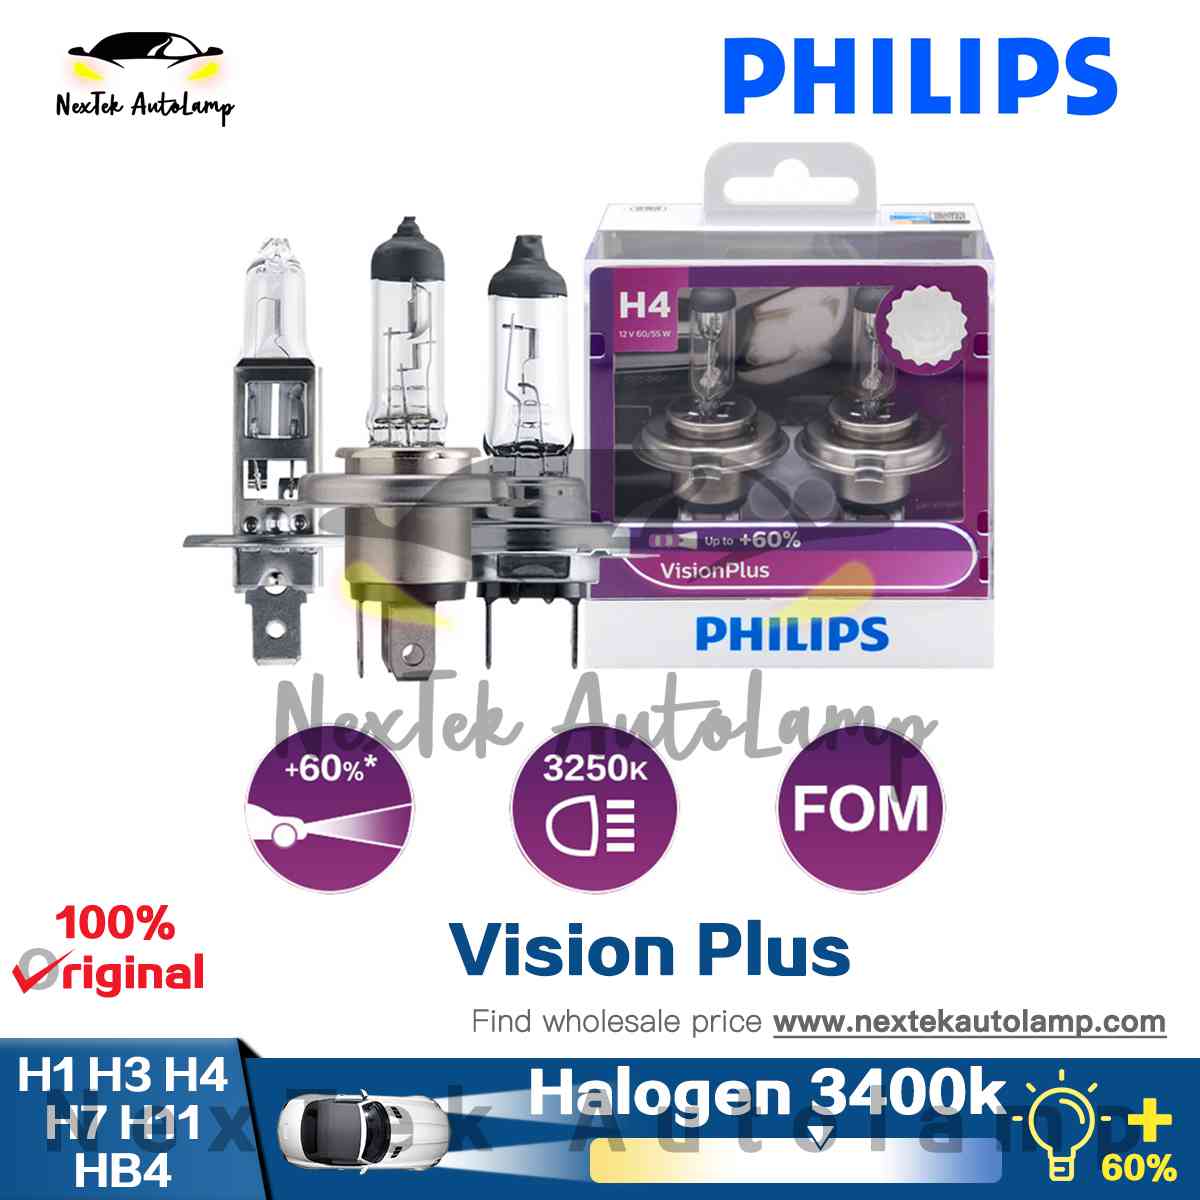 Philips WhiteVision Ultra H1/H4/H7 + W5W (12V) - up to 60% more